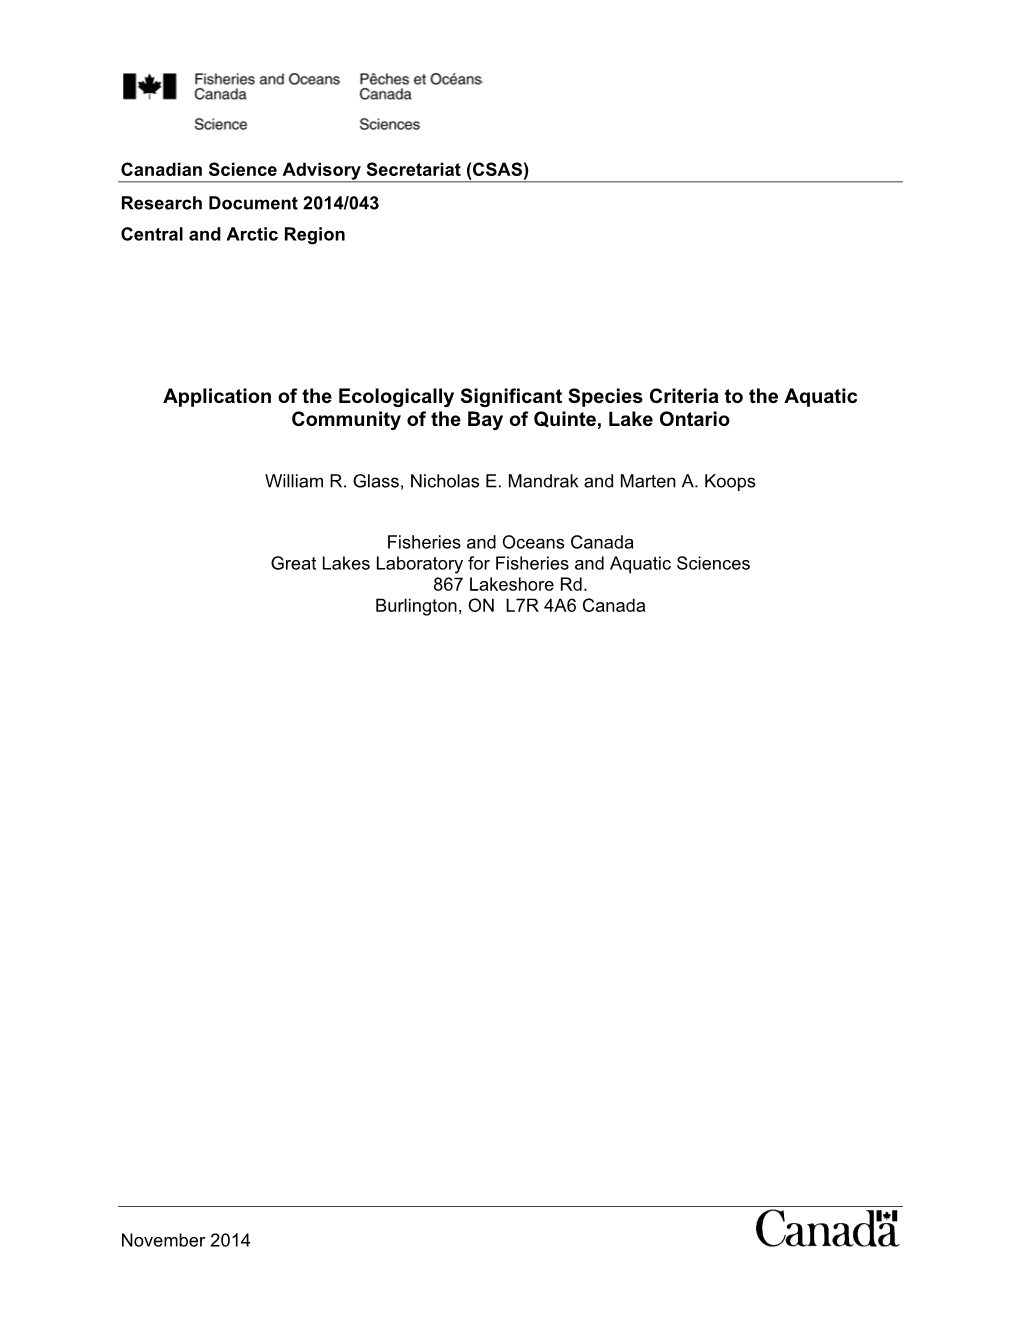 Application of the Ecologically Significant Species Criteria to the Aquatic Community of the Bay of Quinte, Lake Ontario